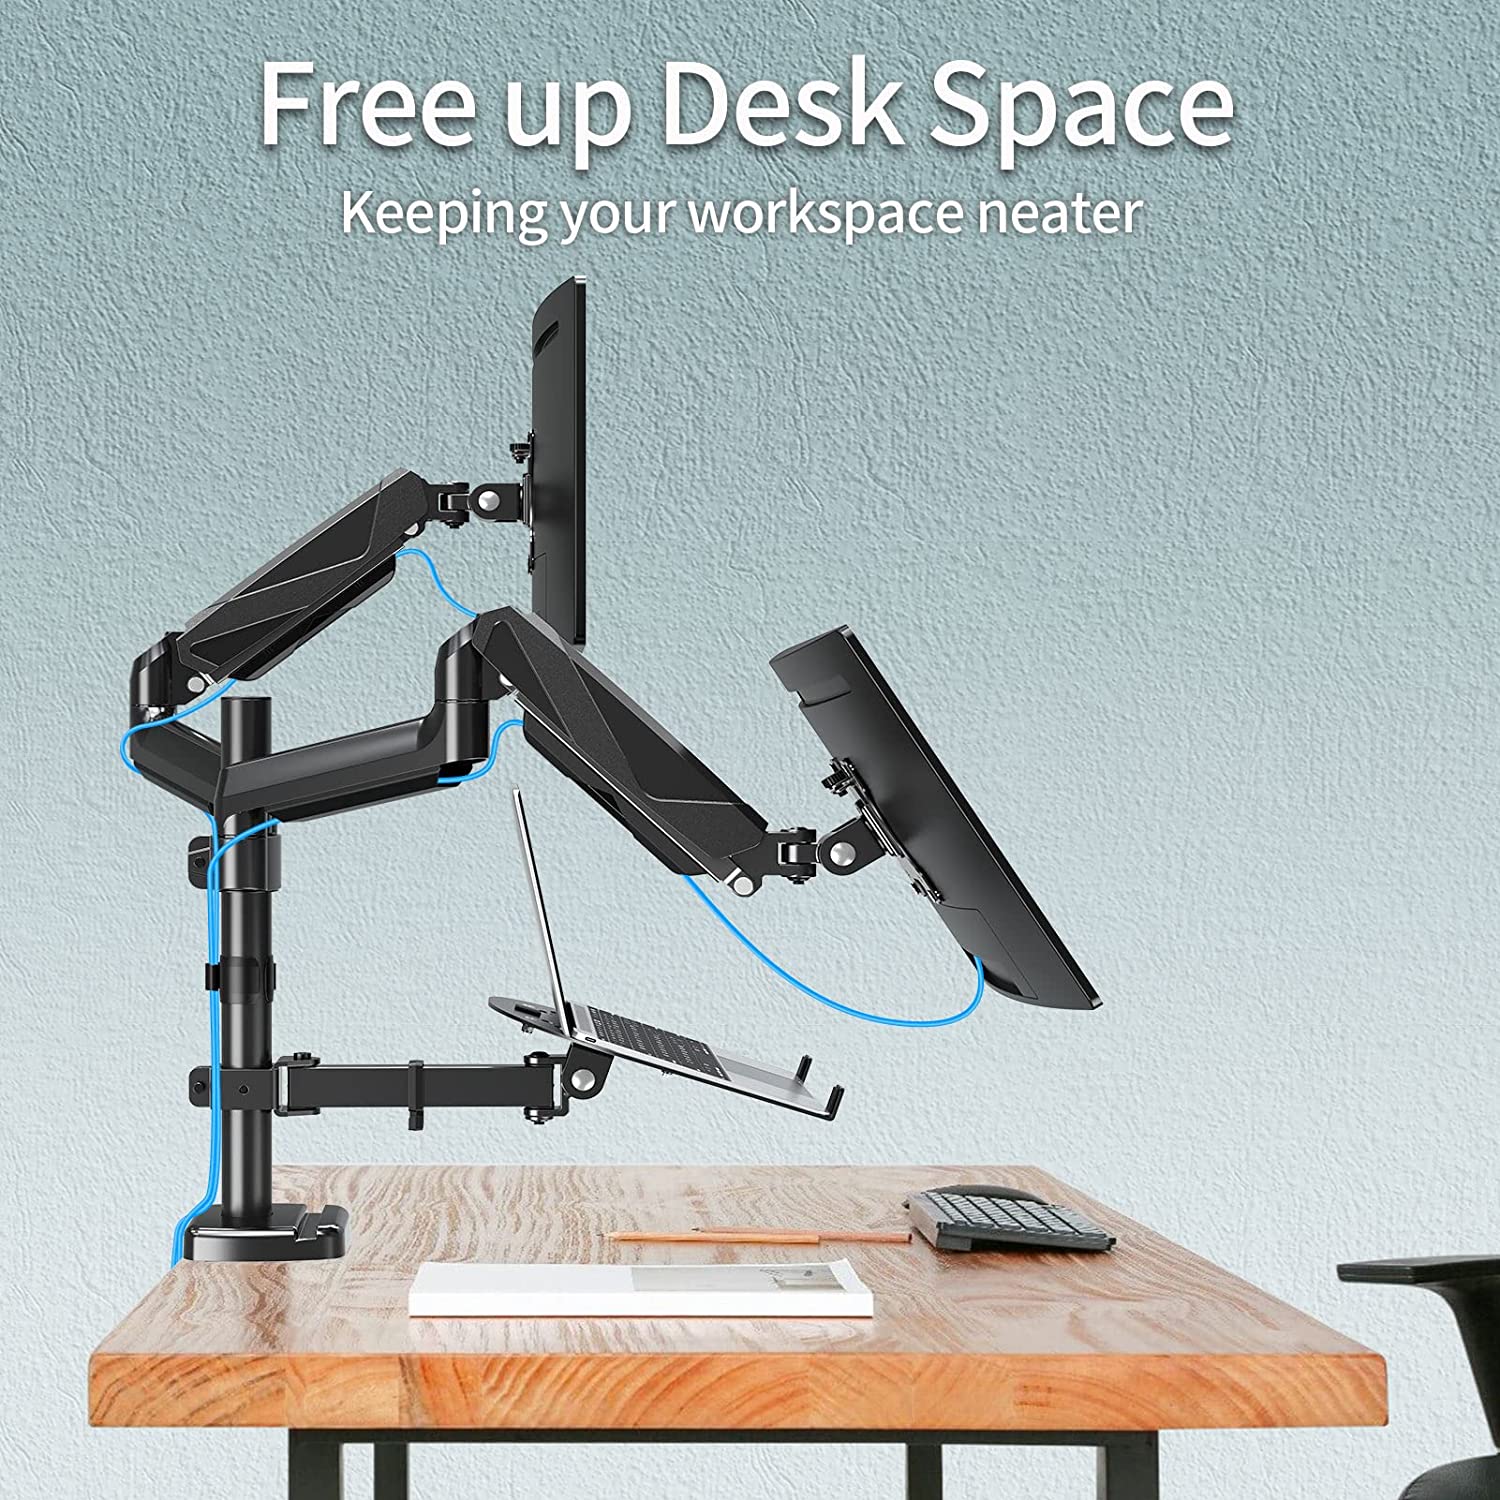 monitor and laptop stand keeps your workspace neater